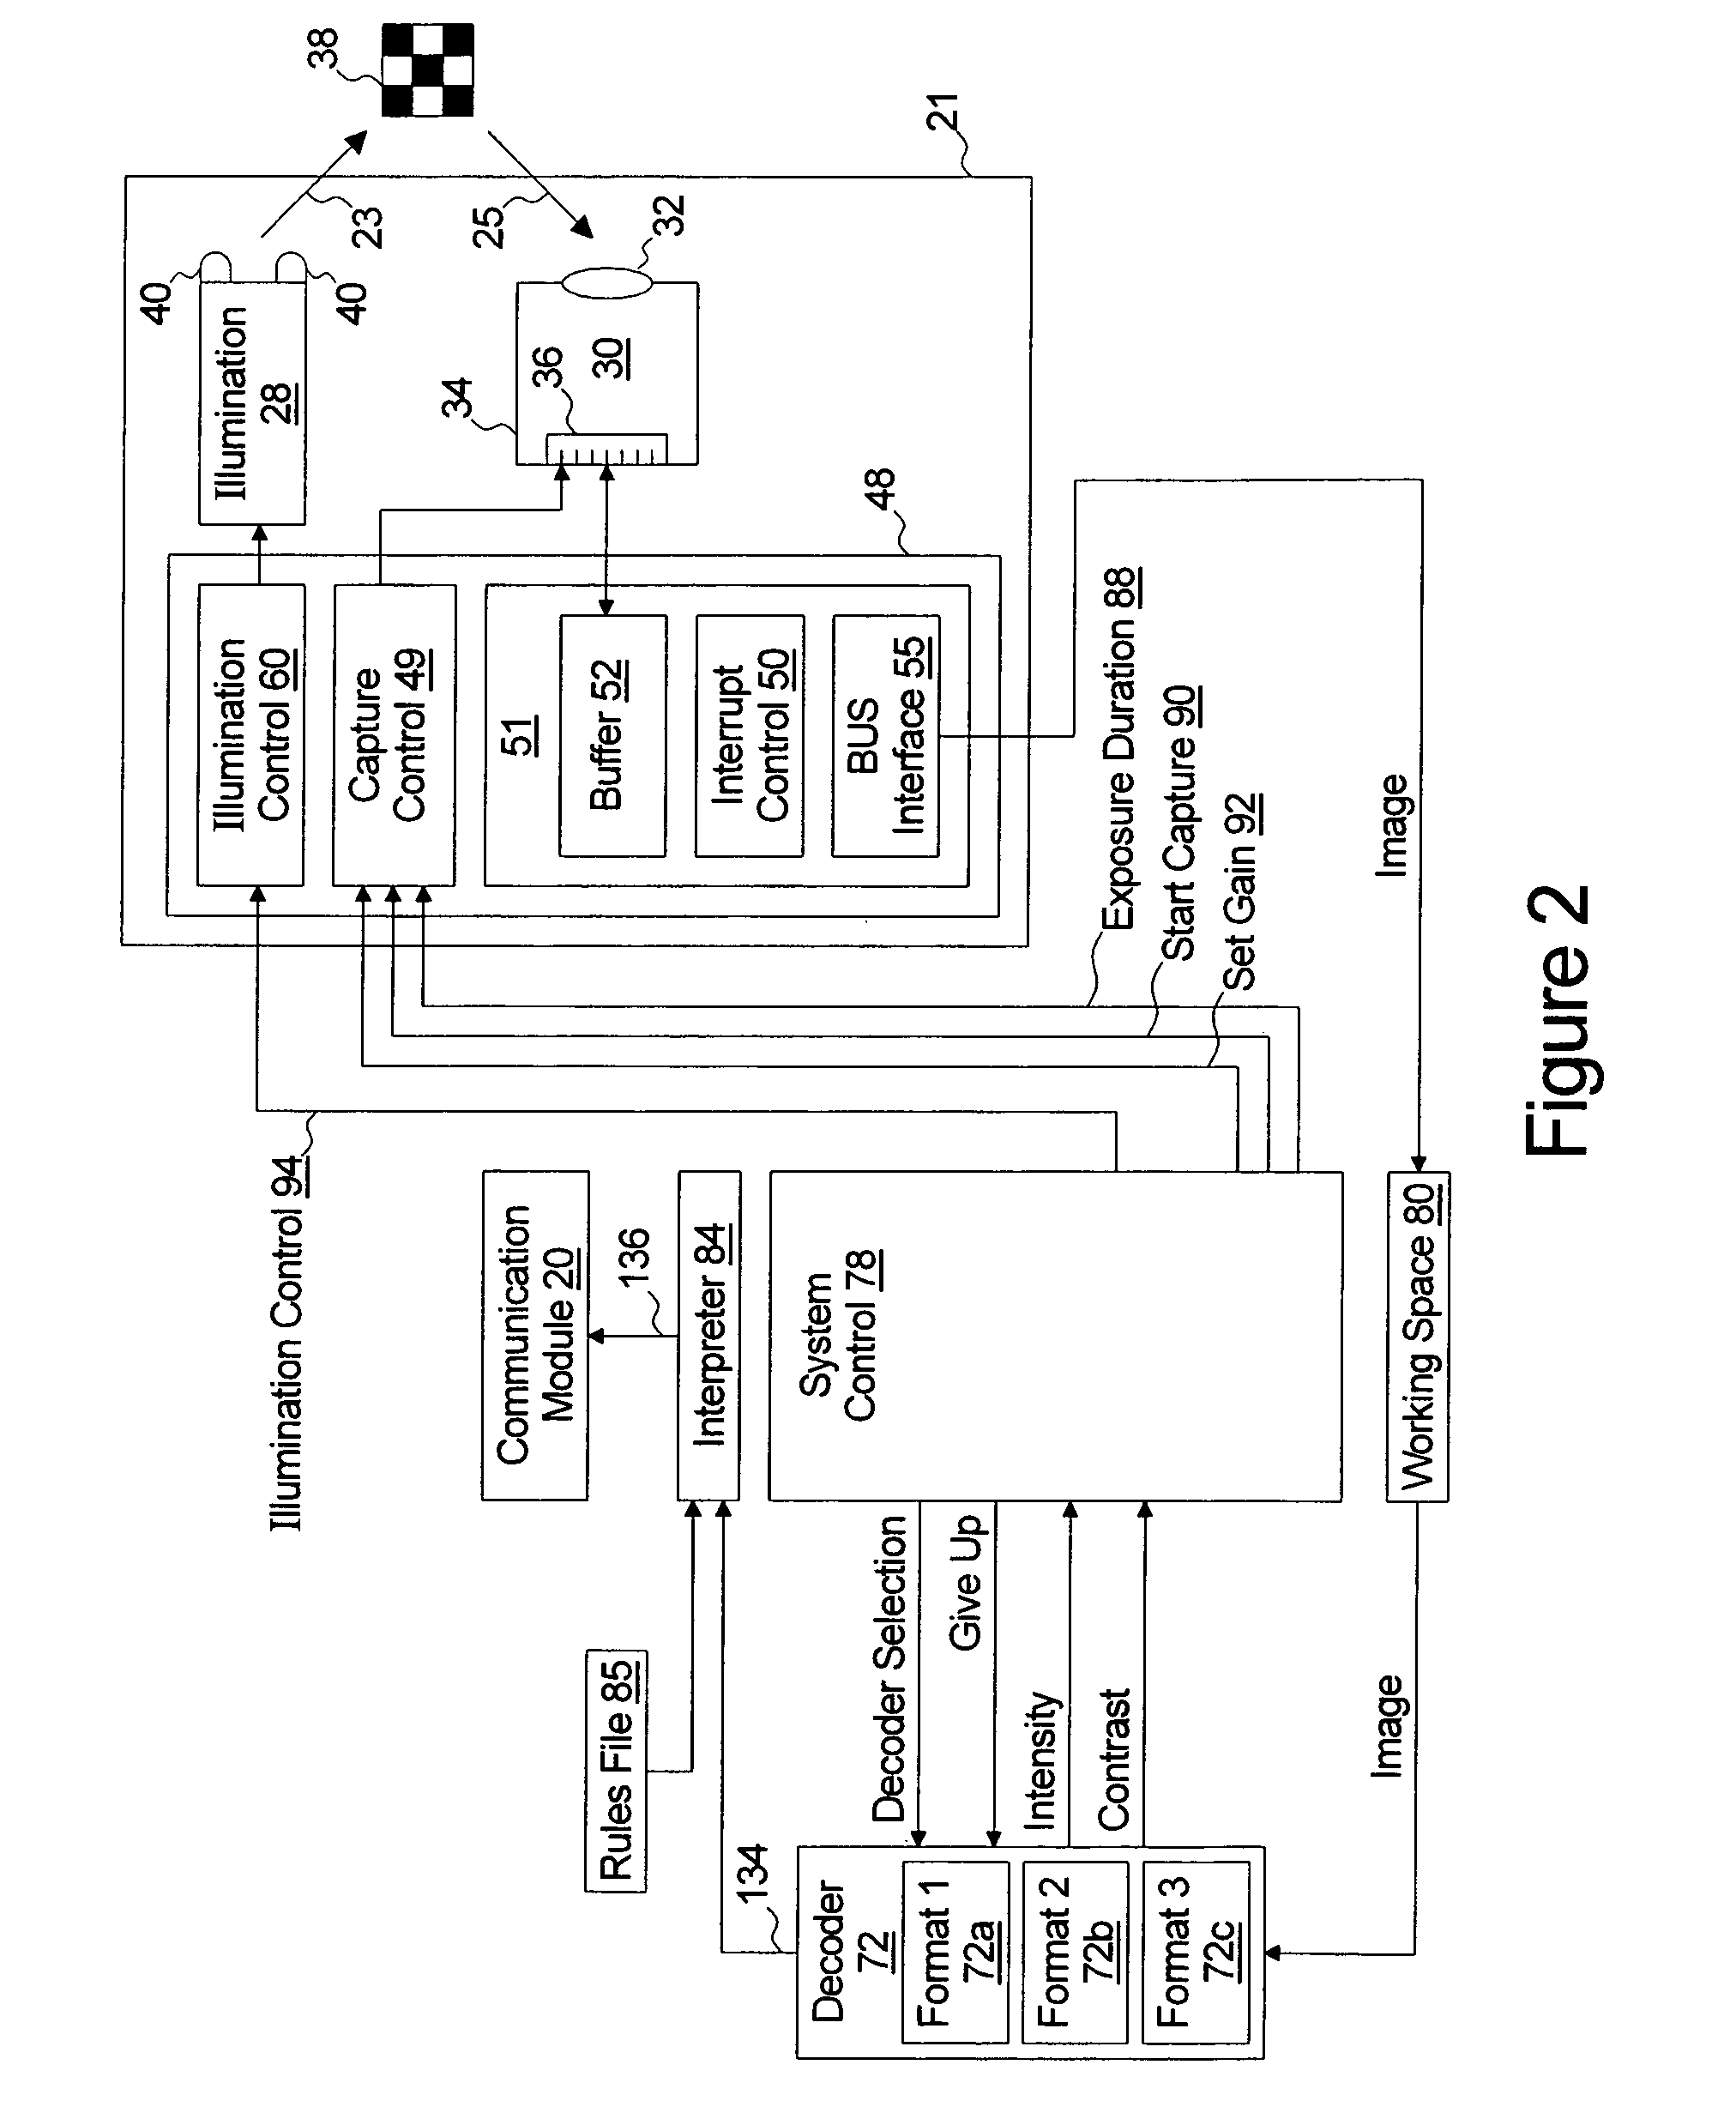 Data collection device with integrated data translation